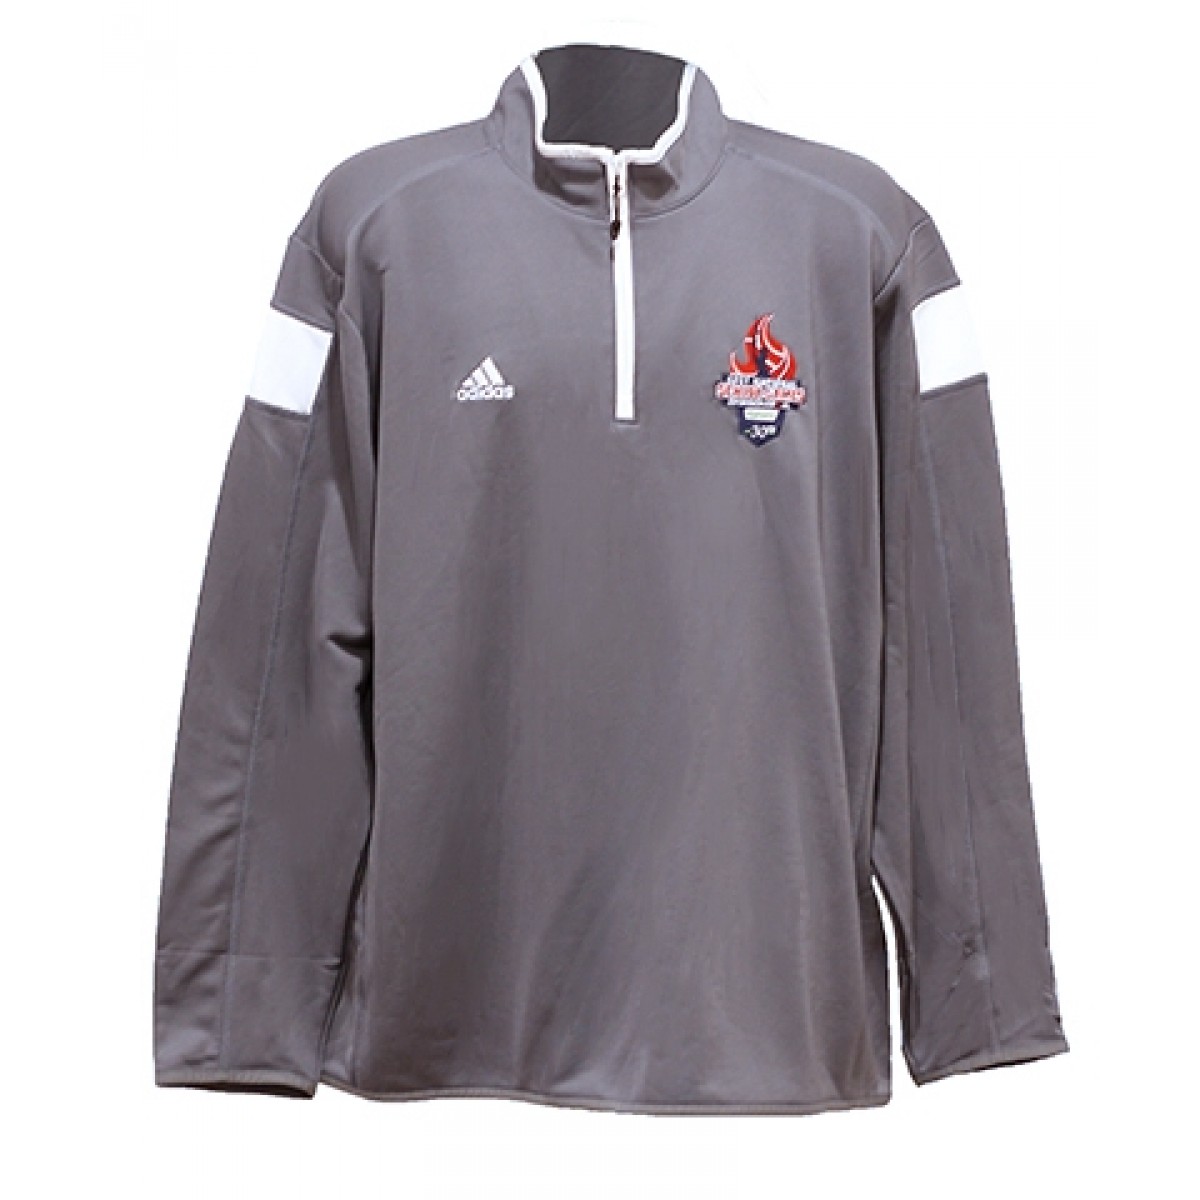 Adidas 1/4 Zip Pullover w/ Embroidered Logo-XS